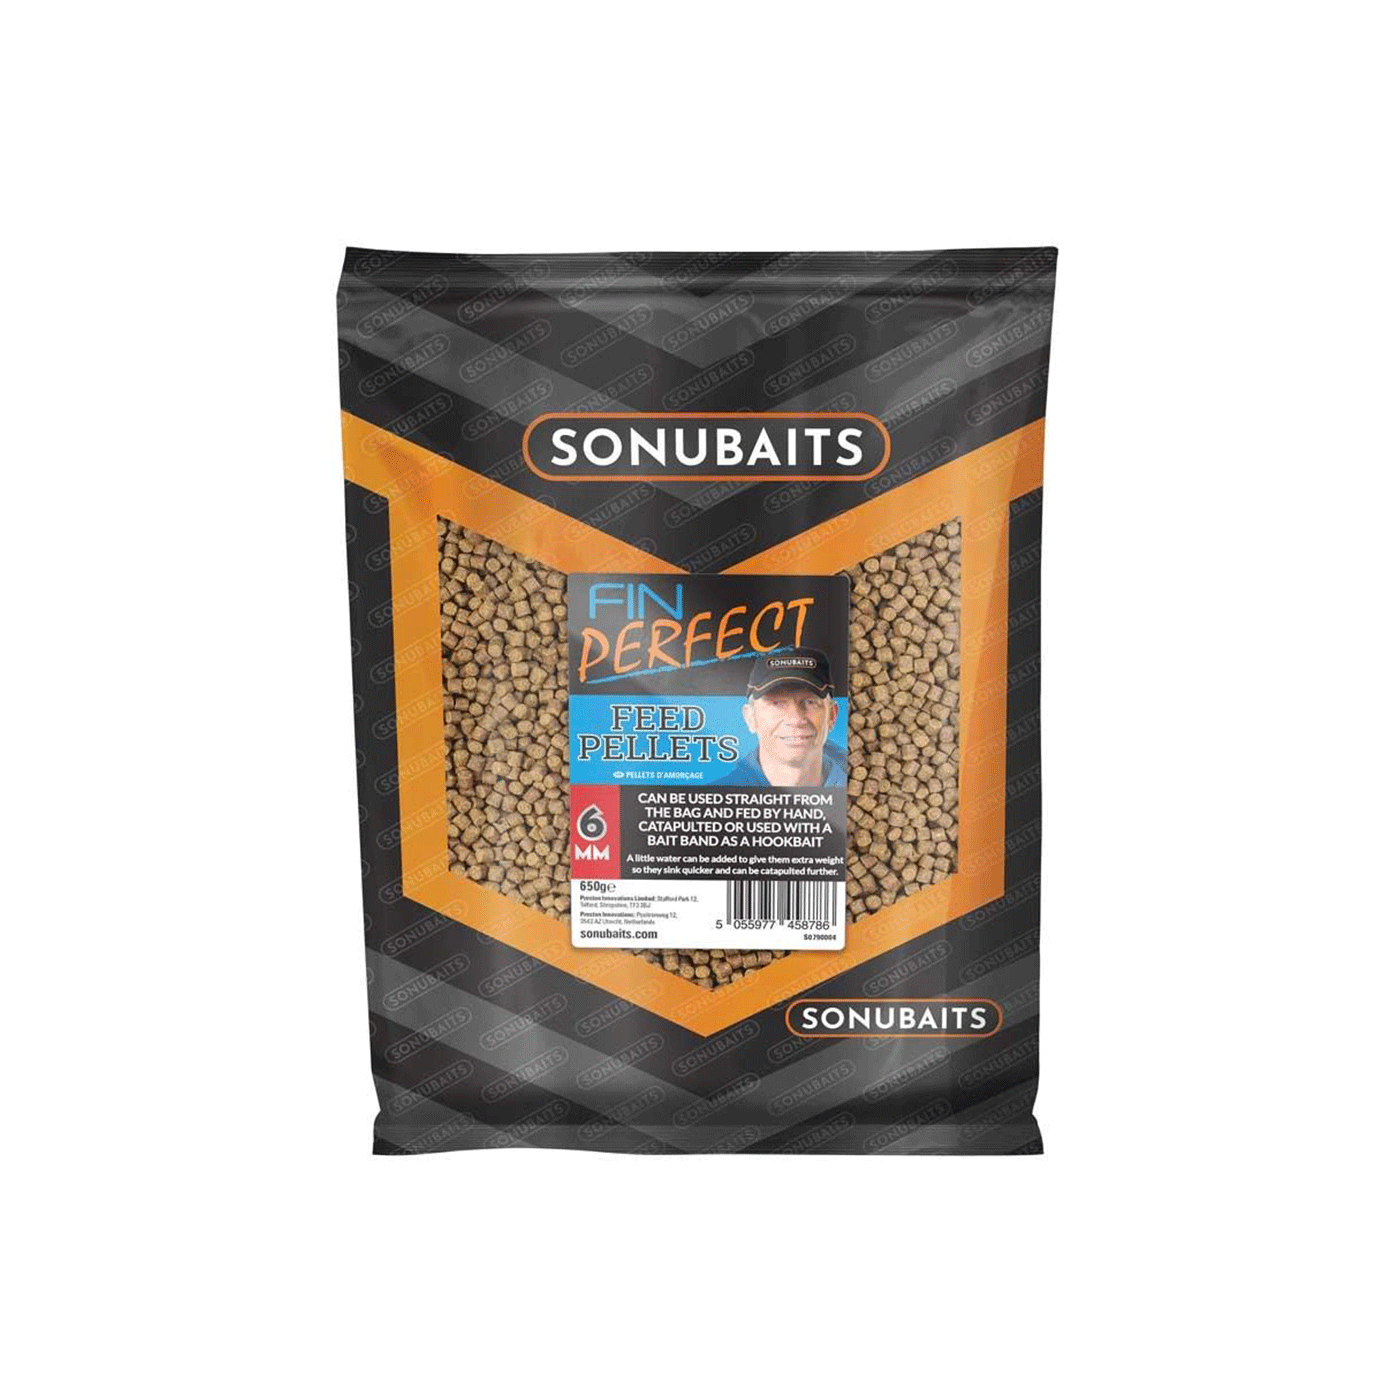 SONUBAITS - FIN PERFECT FEED PELLETS 6mm 650g